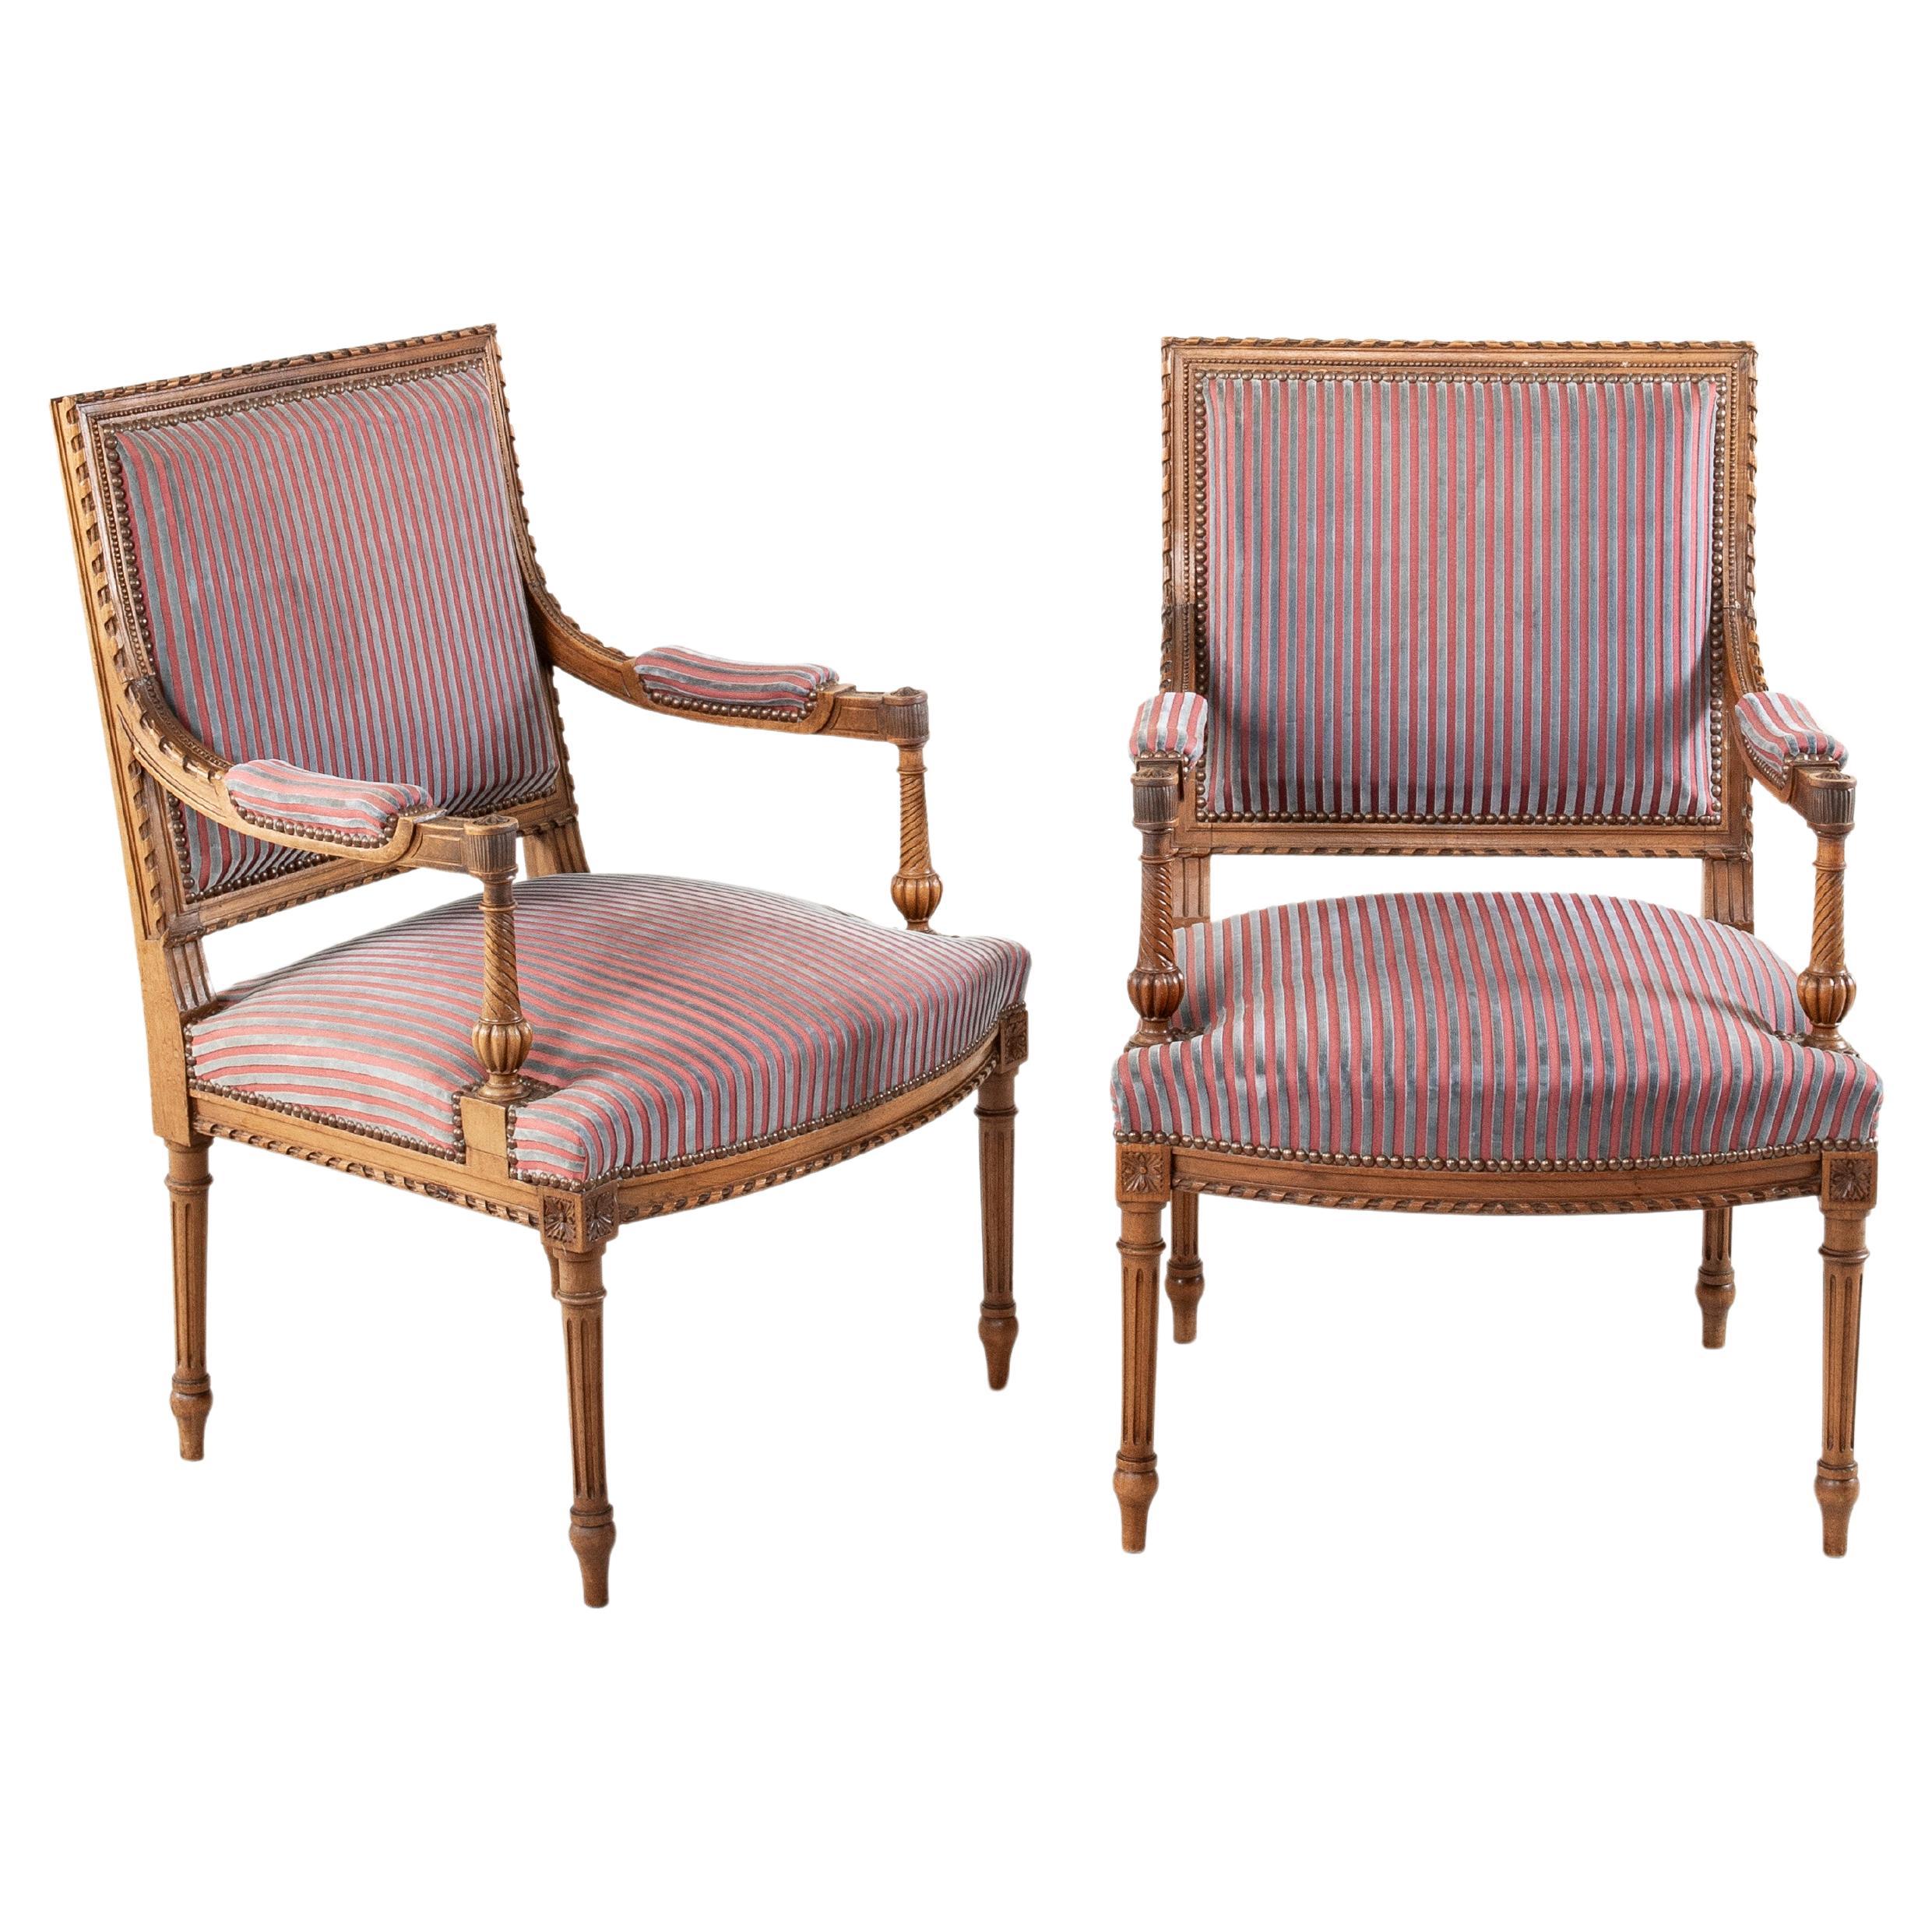 Pair of Late 19th Century French Louis XVI Style Hand Carved Walnut Armchairs